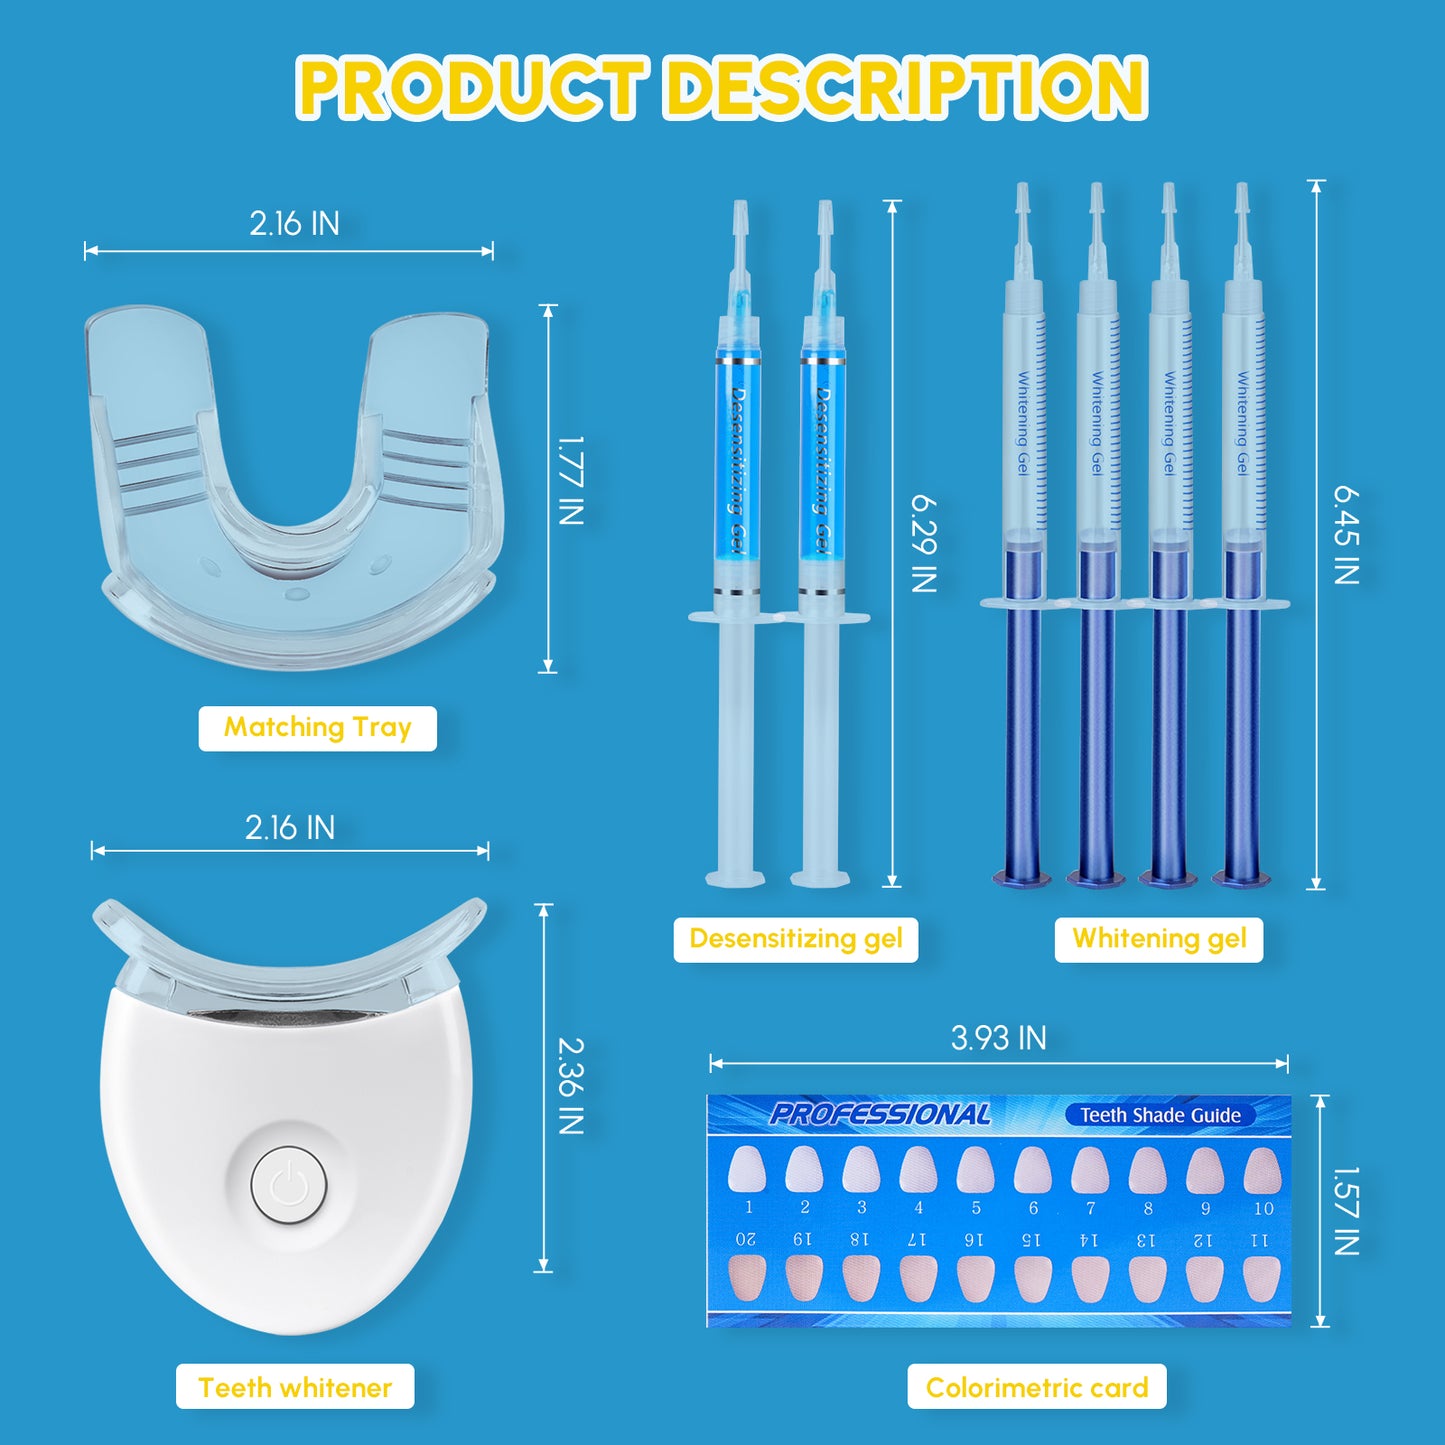 Whitening Kit for Sensitive Teeth Oral Care, Includes LED Light, 4 Whitening Gel and 2 Desensitizing Gel, Whitening Gel Helps to Remove Stains Caused by Food, Coffee, Soda, Smoking